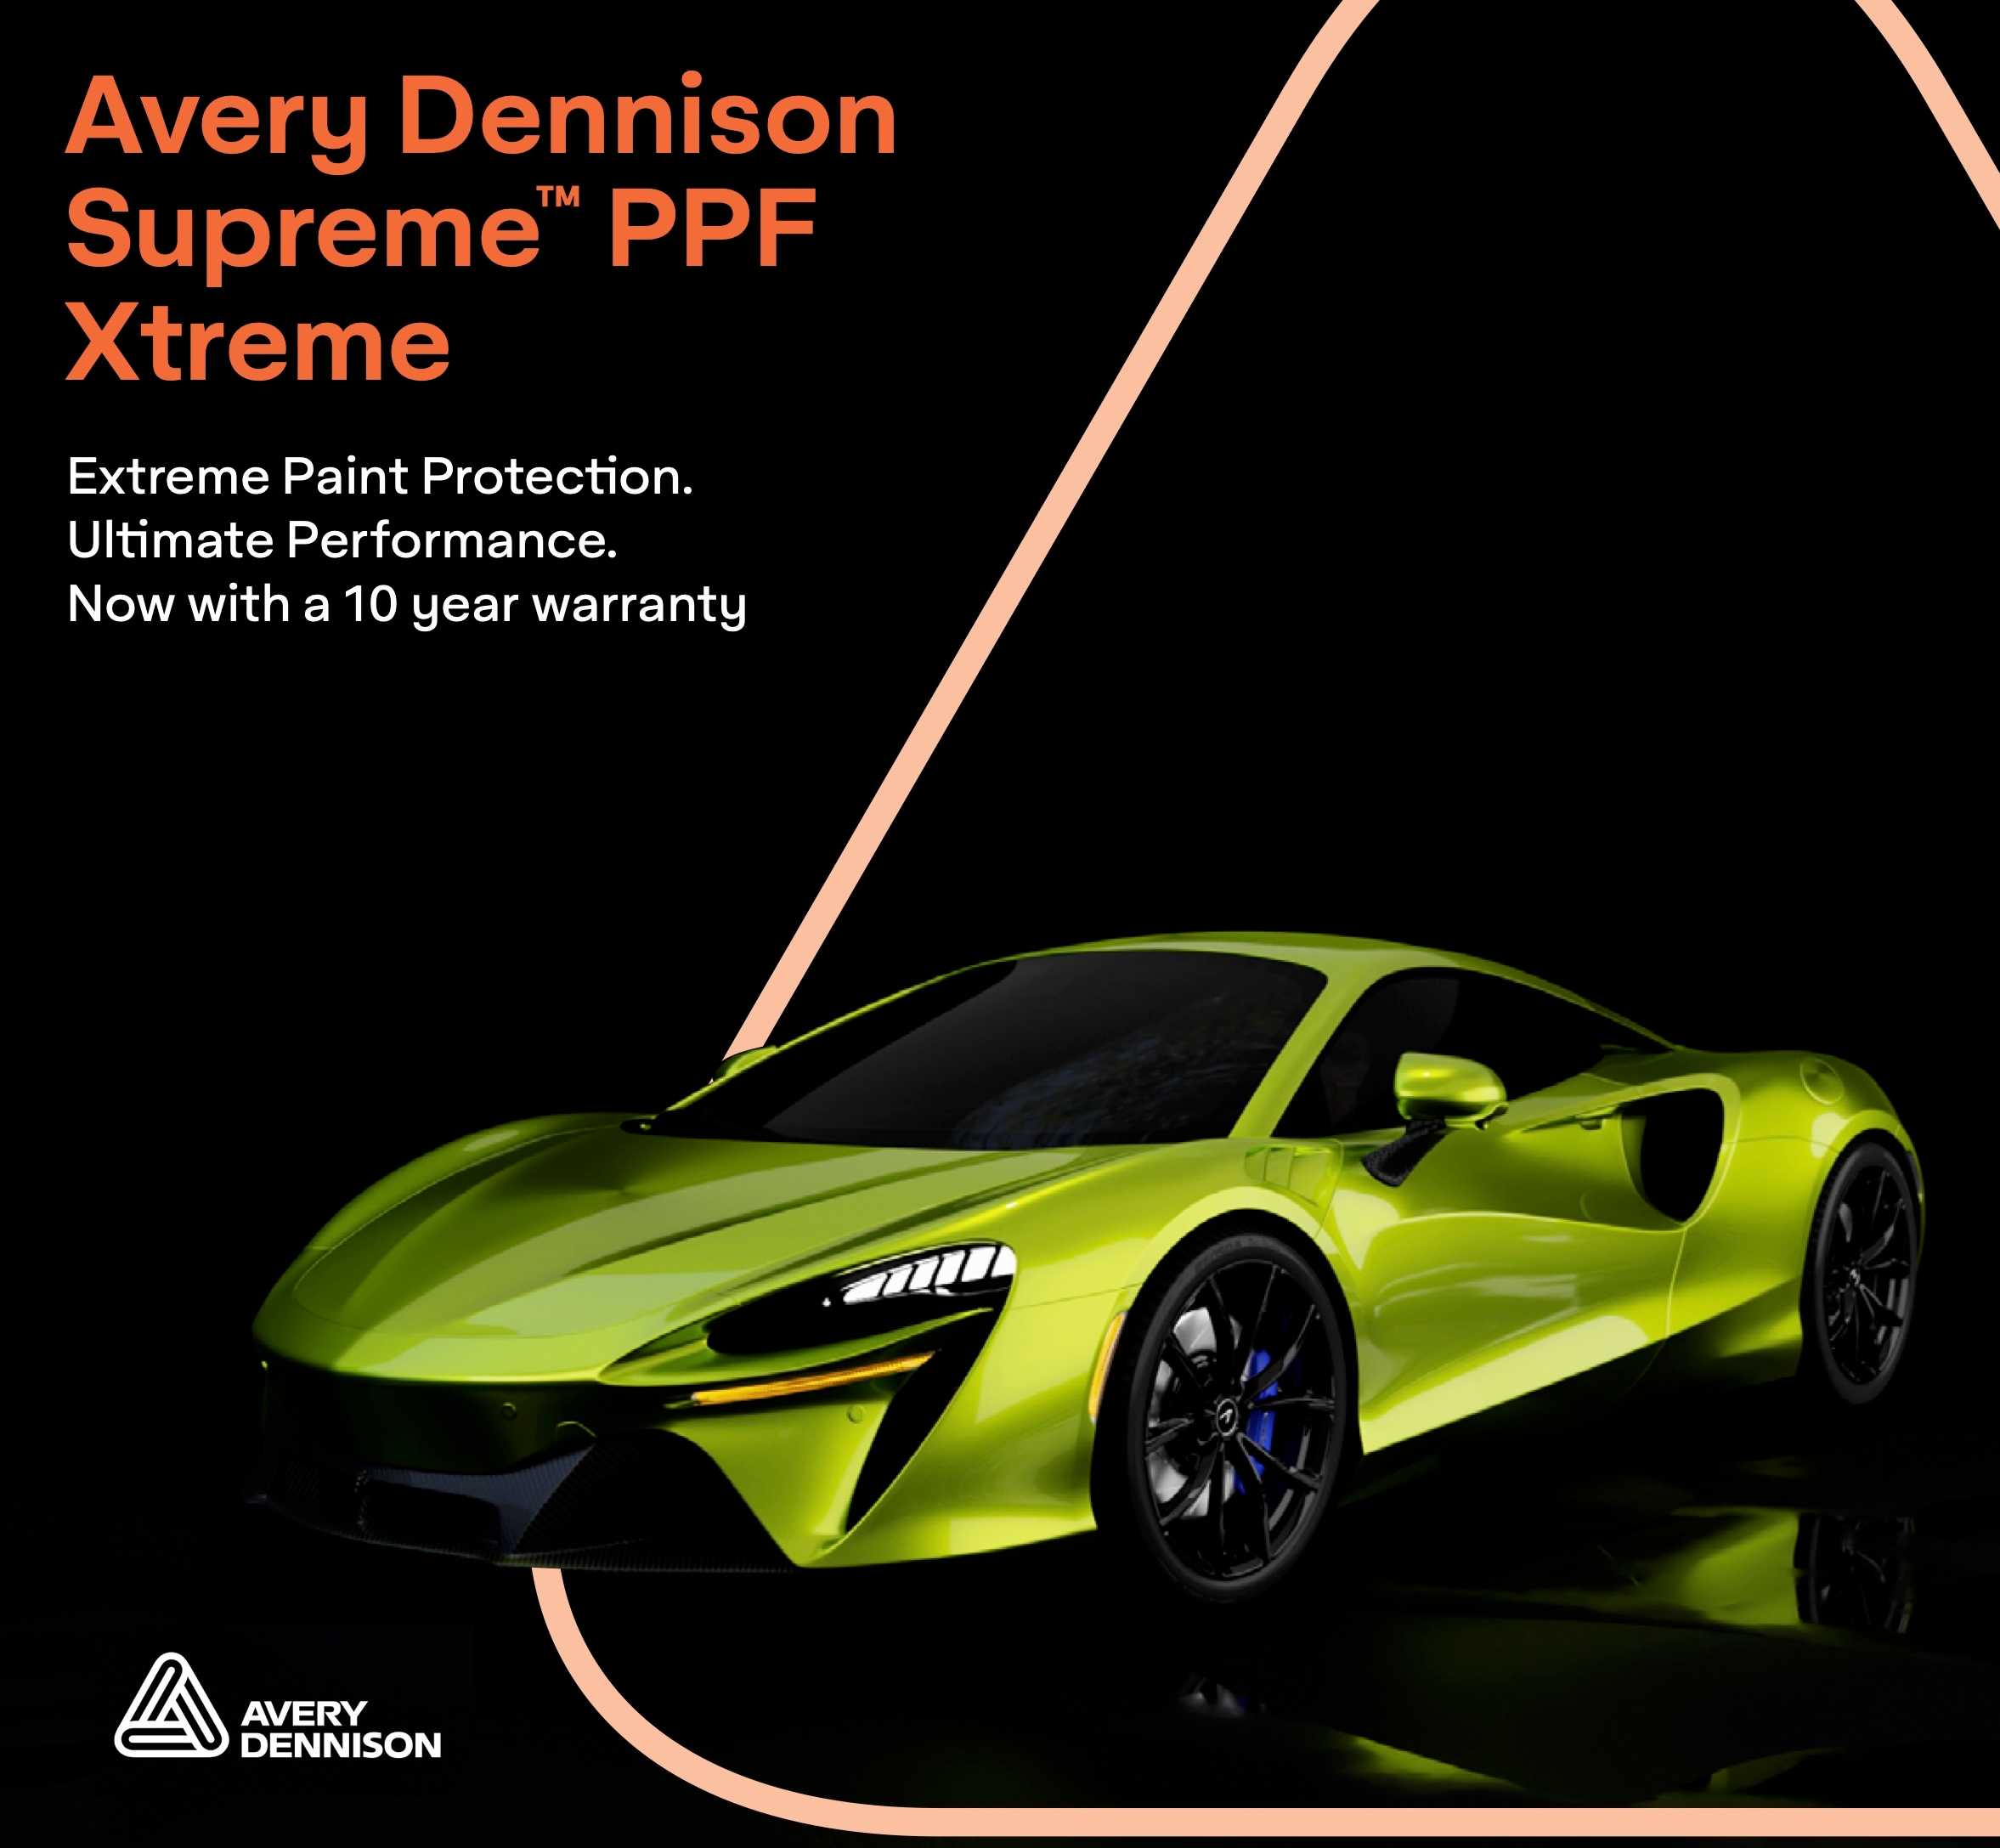 Supreme™ PPF Xtreme is the latest evolution in Paint Protection Film from Avery Dennison